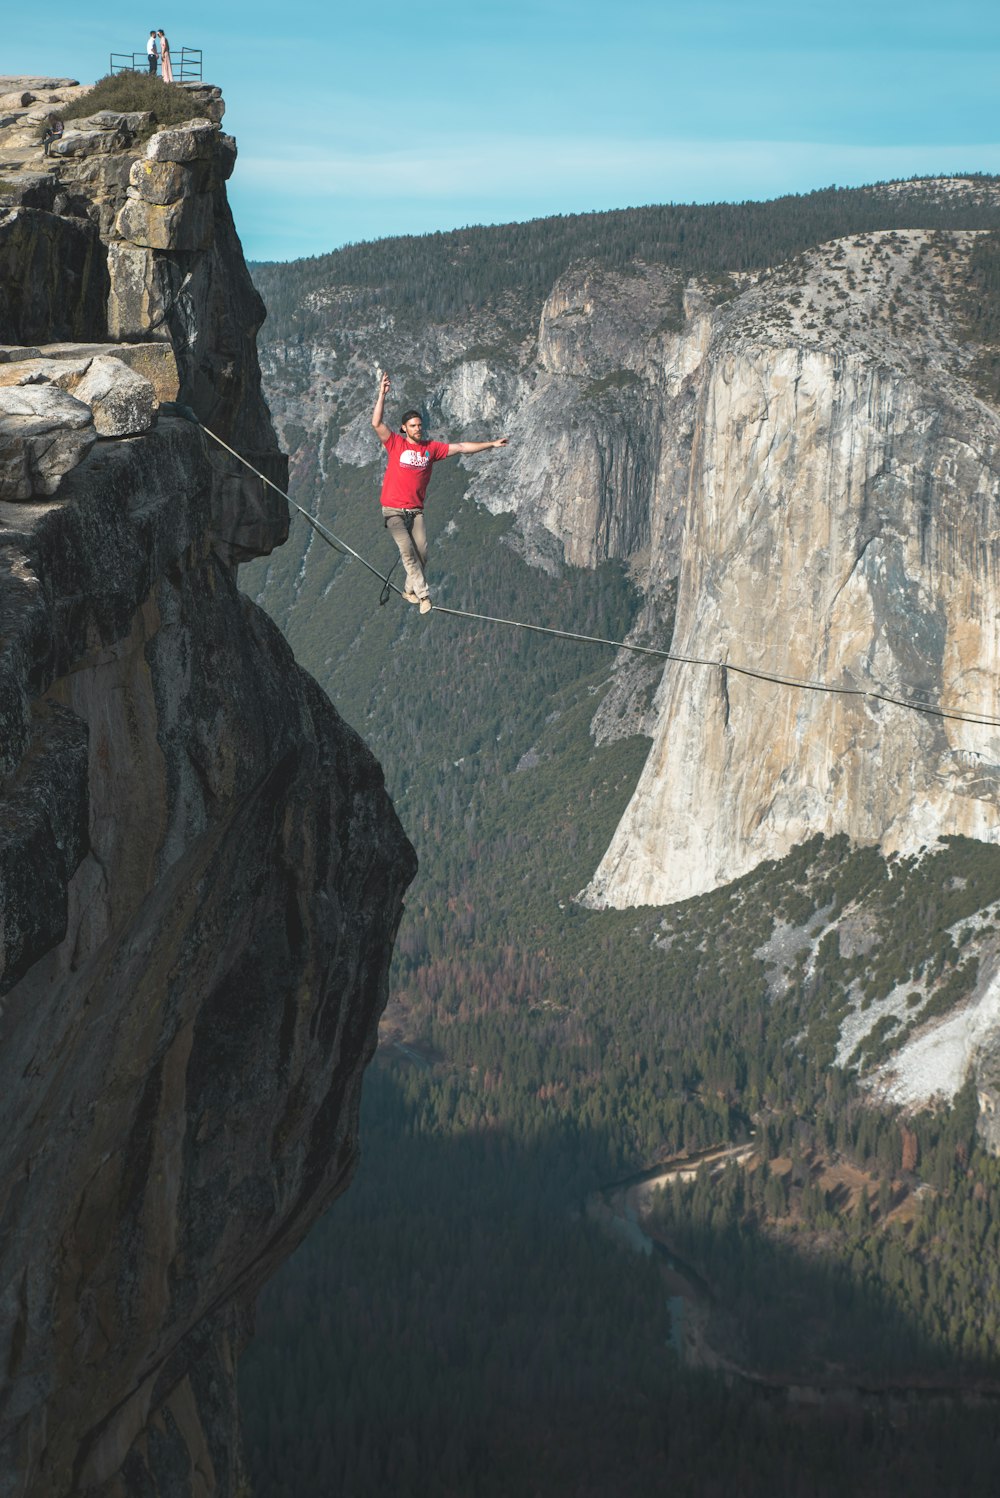 person standing on rope near mountain cliff